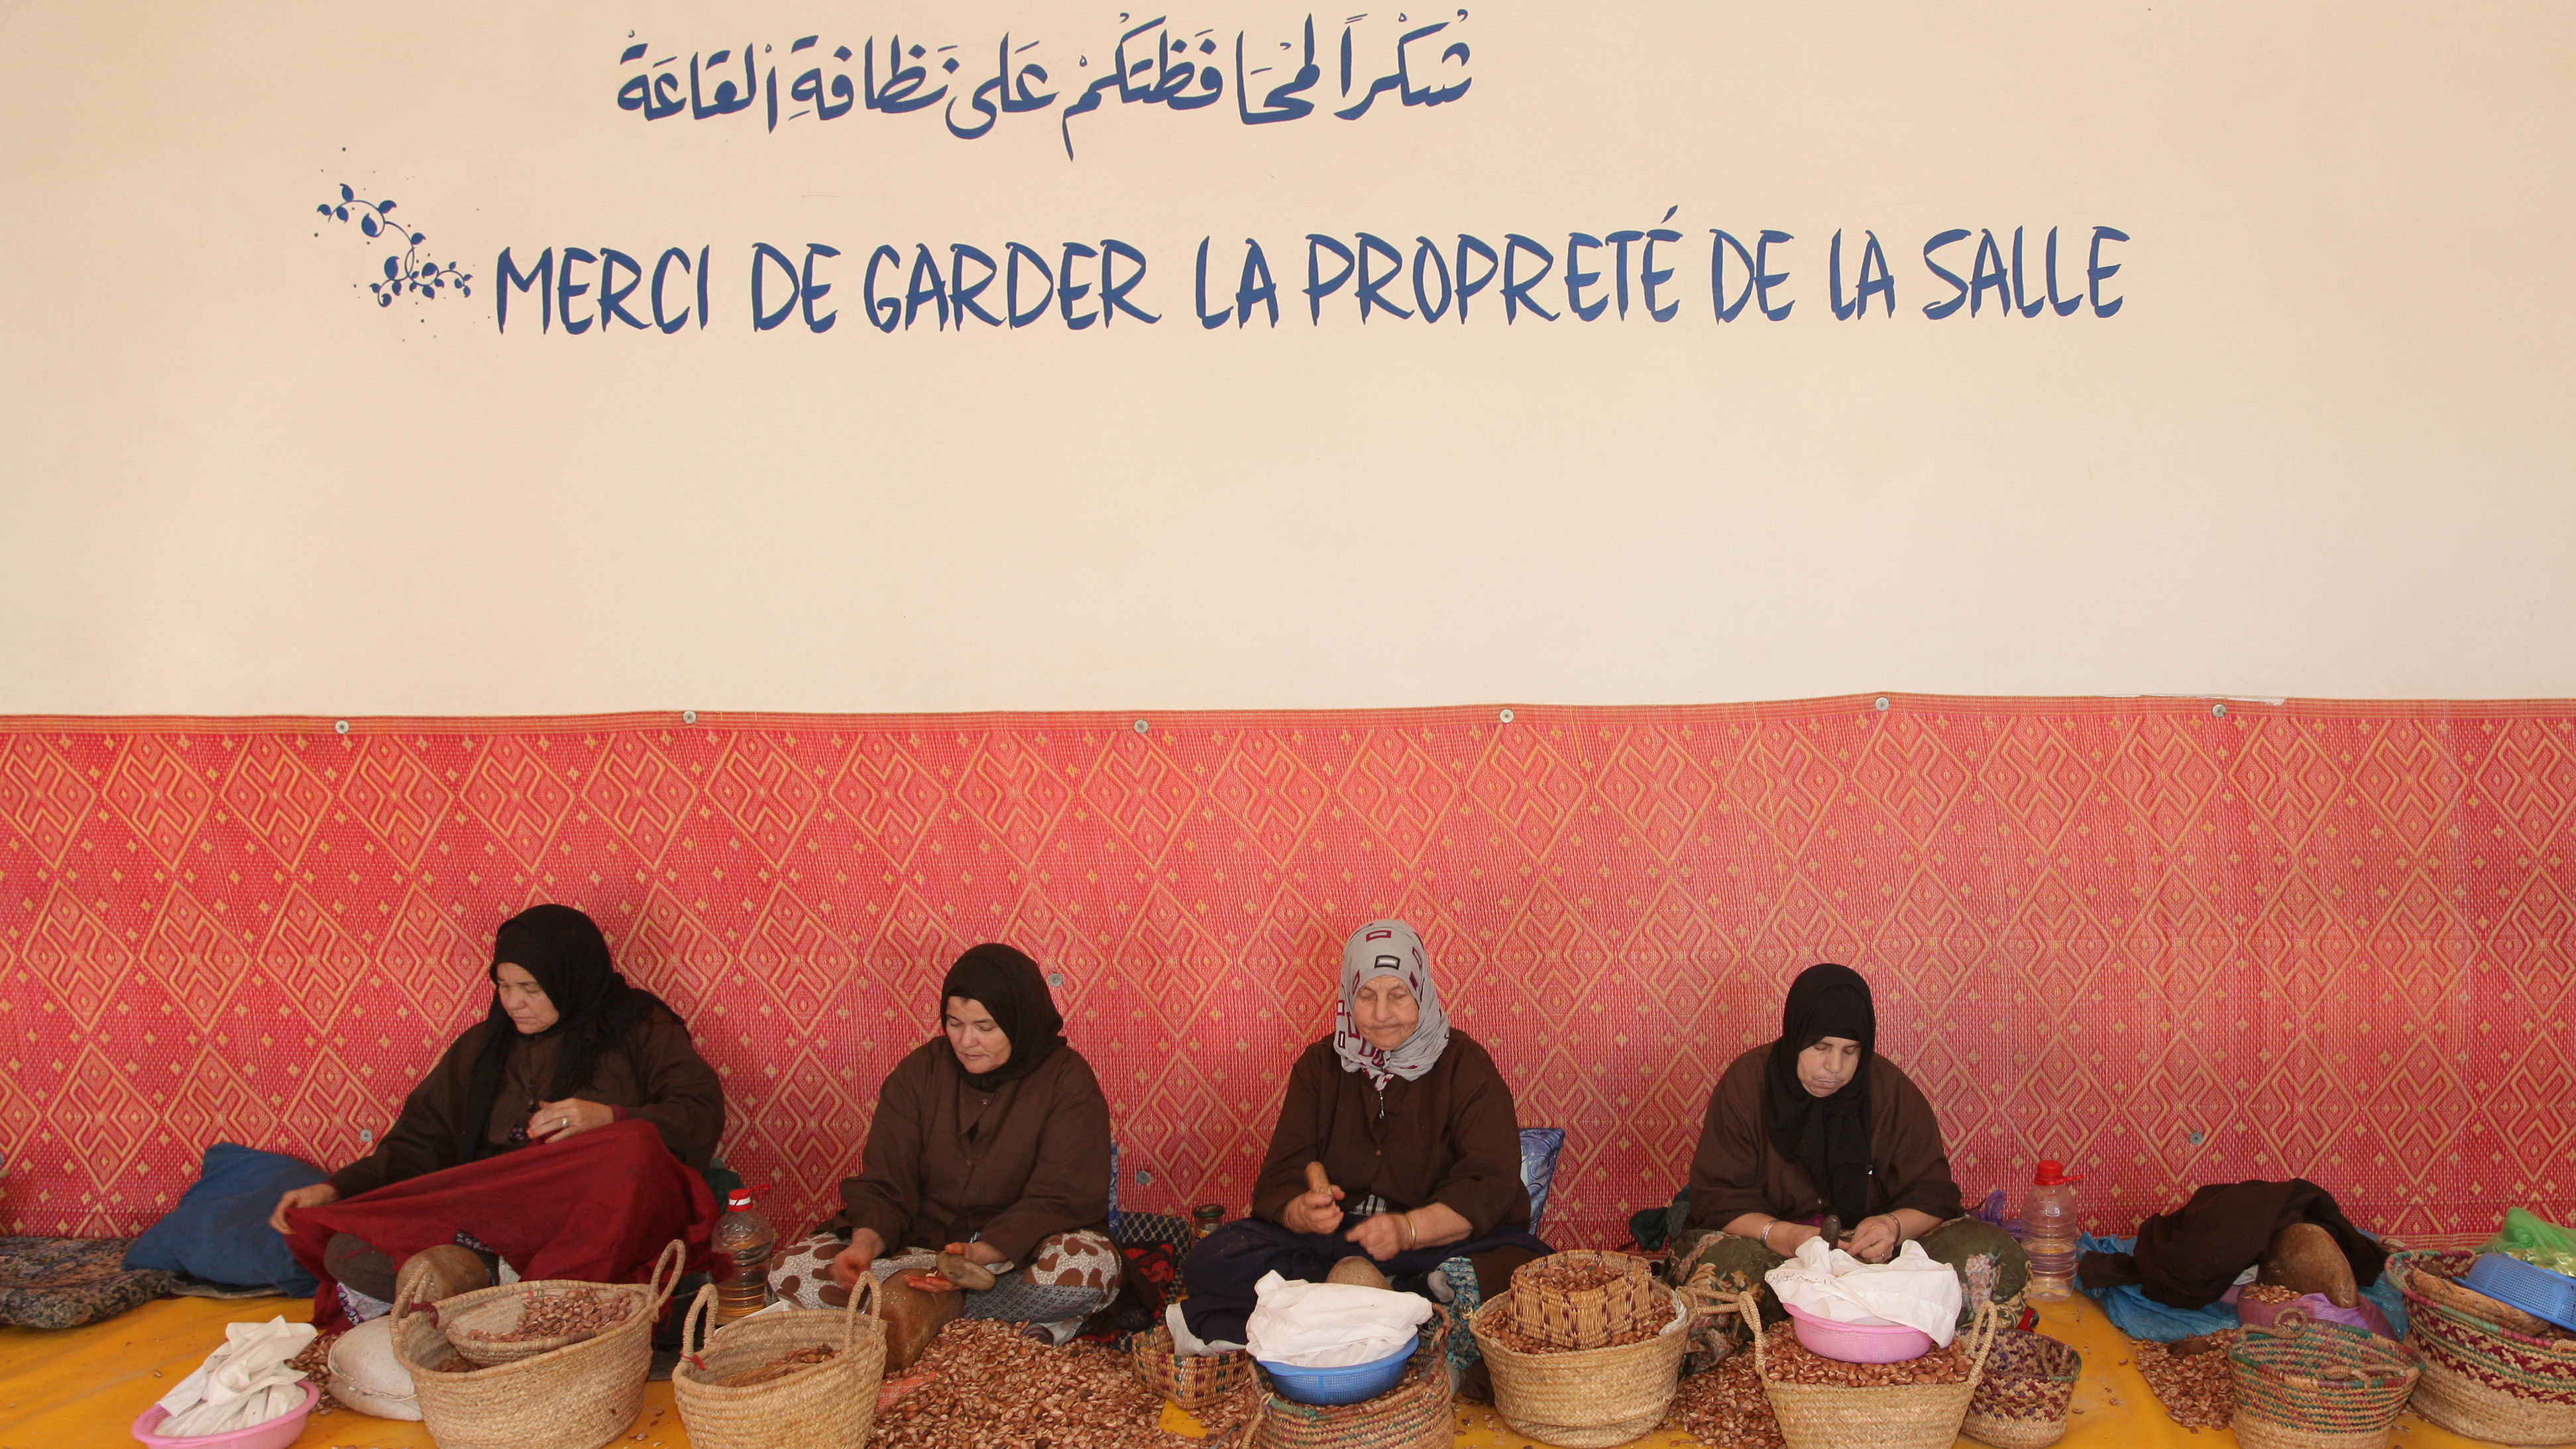 Language Ideologies Create Conflict in Morocco